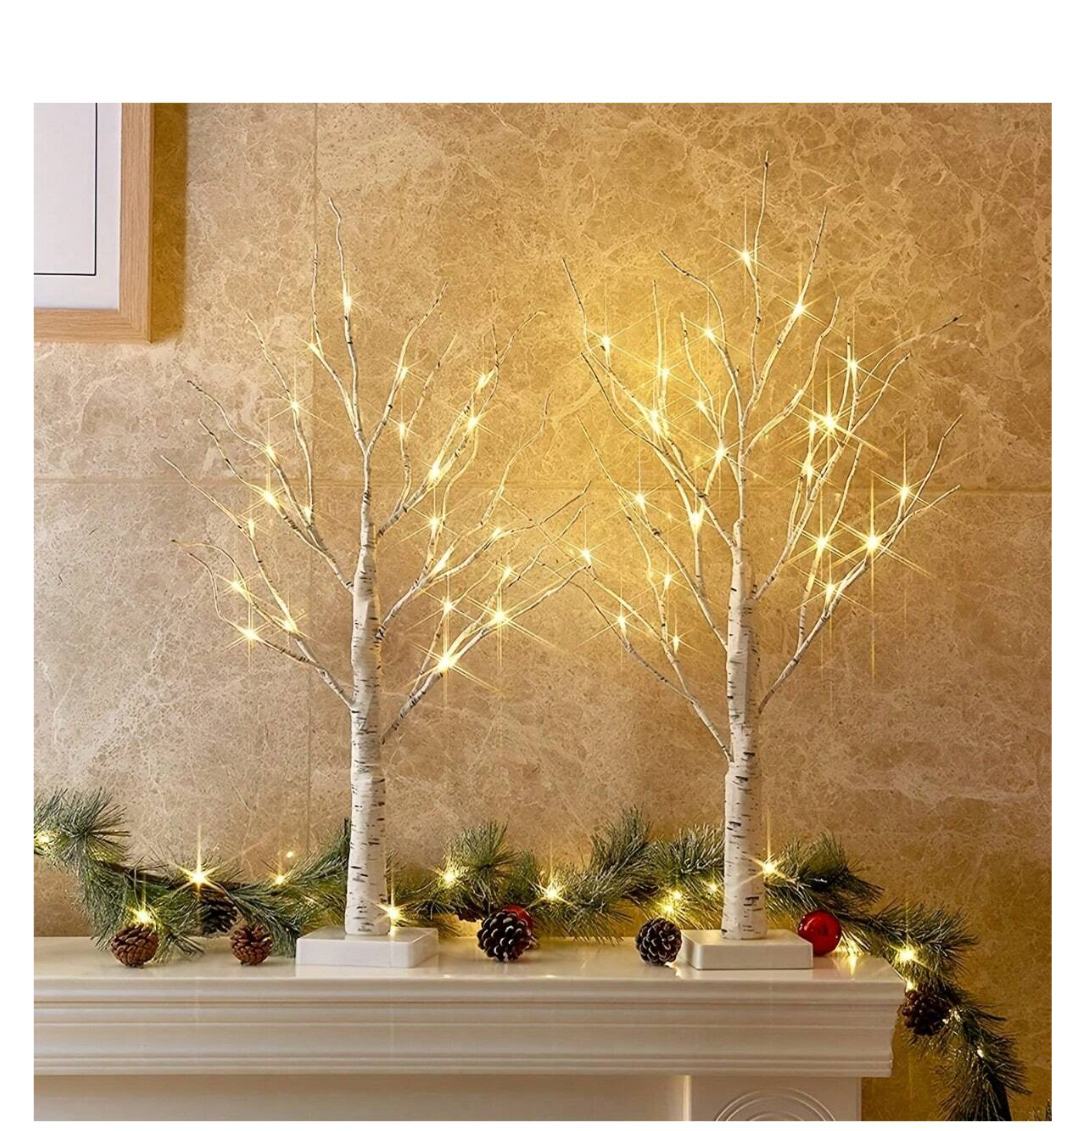 Enchanting Glow: 24 LED Flickering Easter Trees - Elf Light Elf Tree Decoration for Magical Outdoor Adventures!